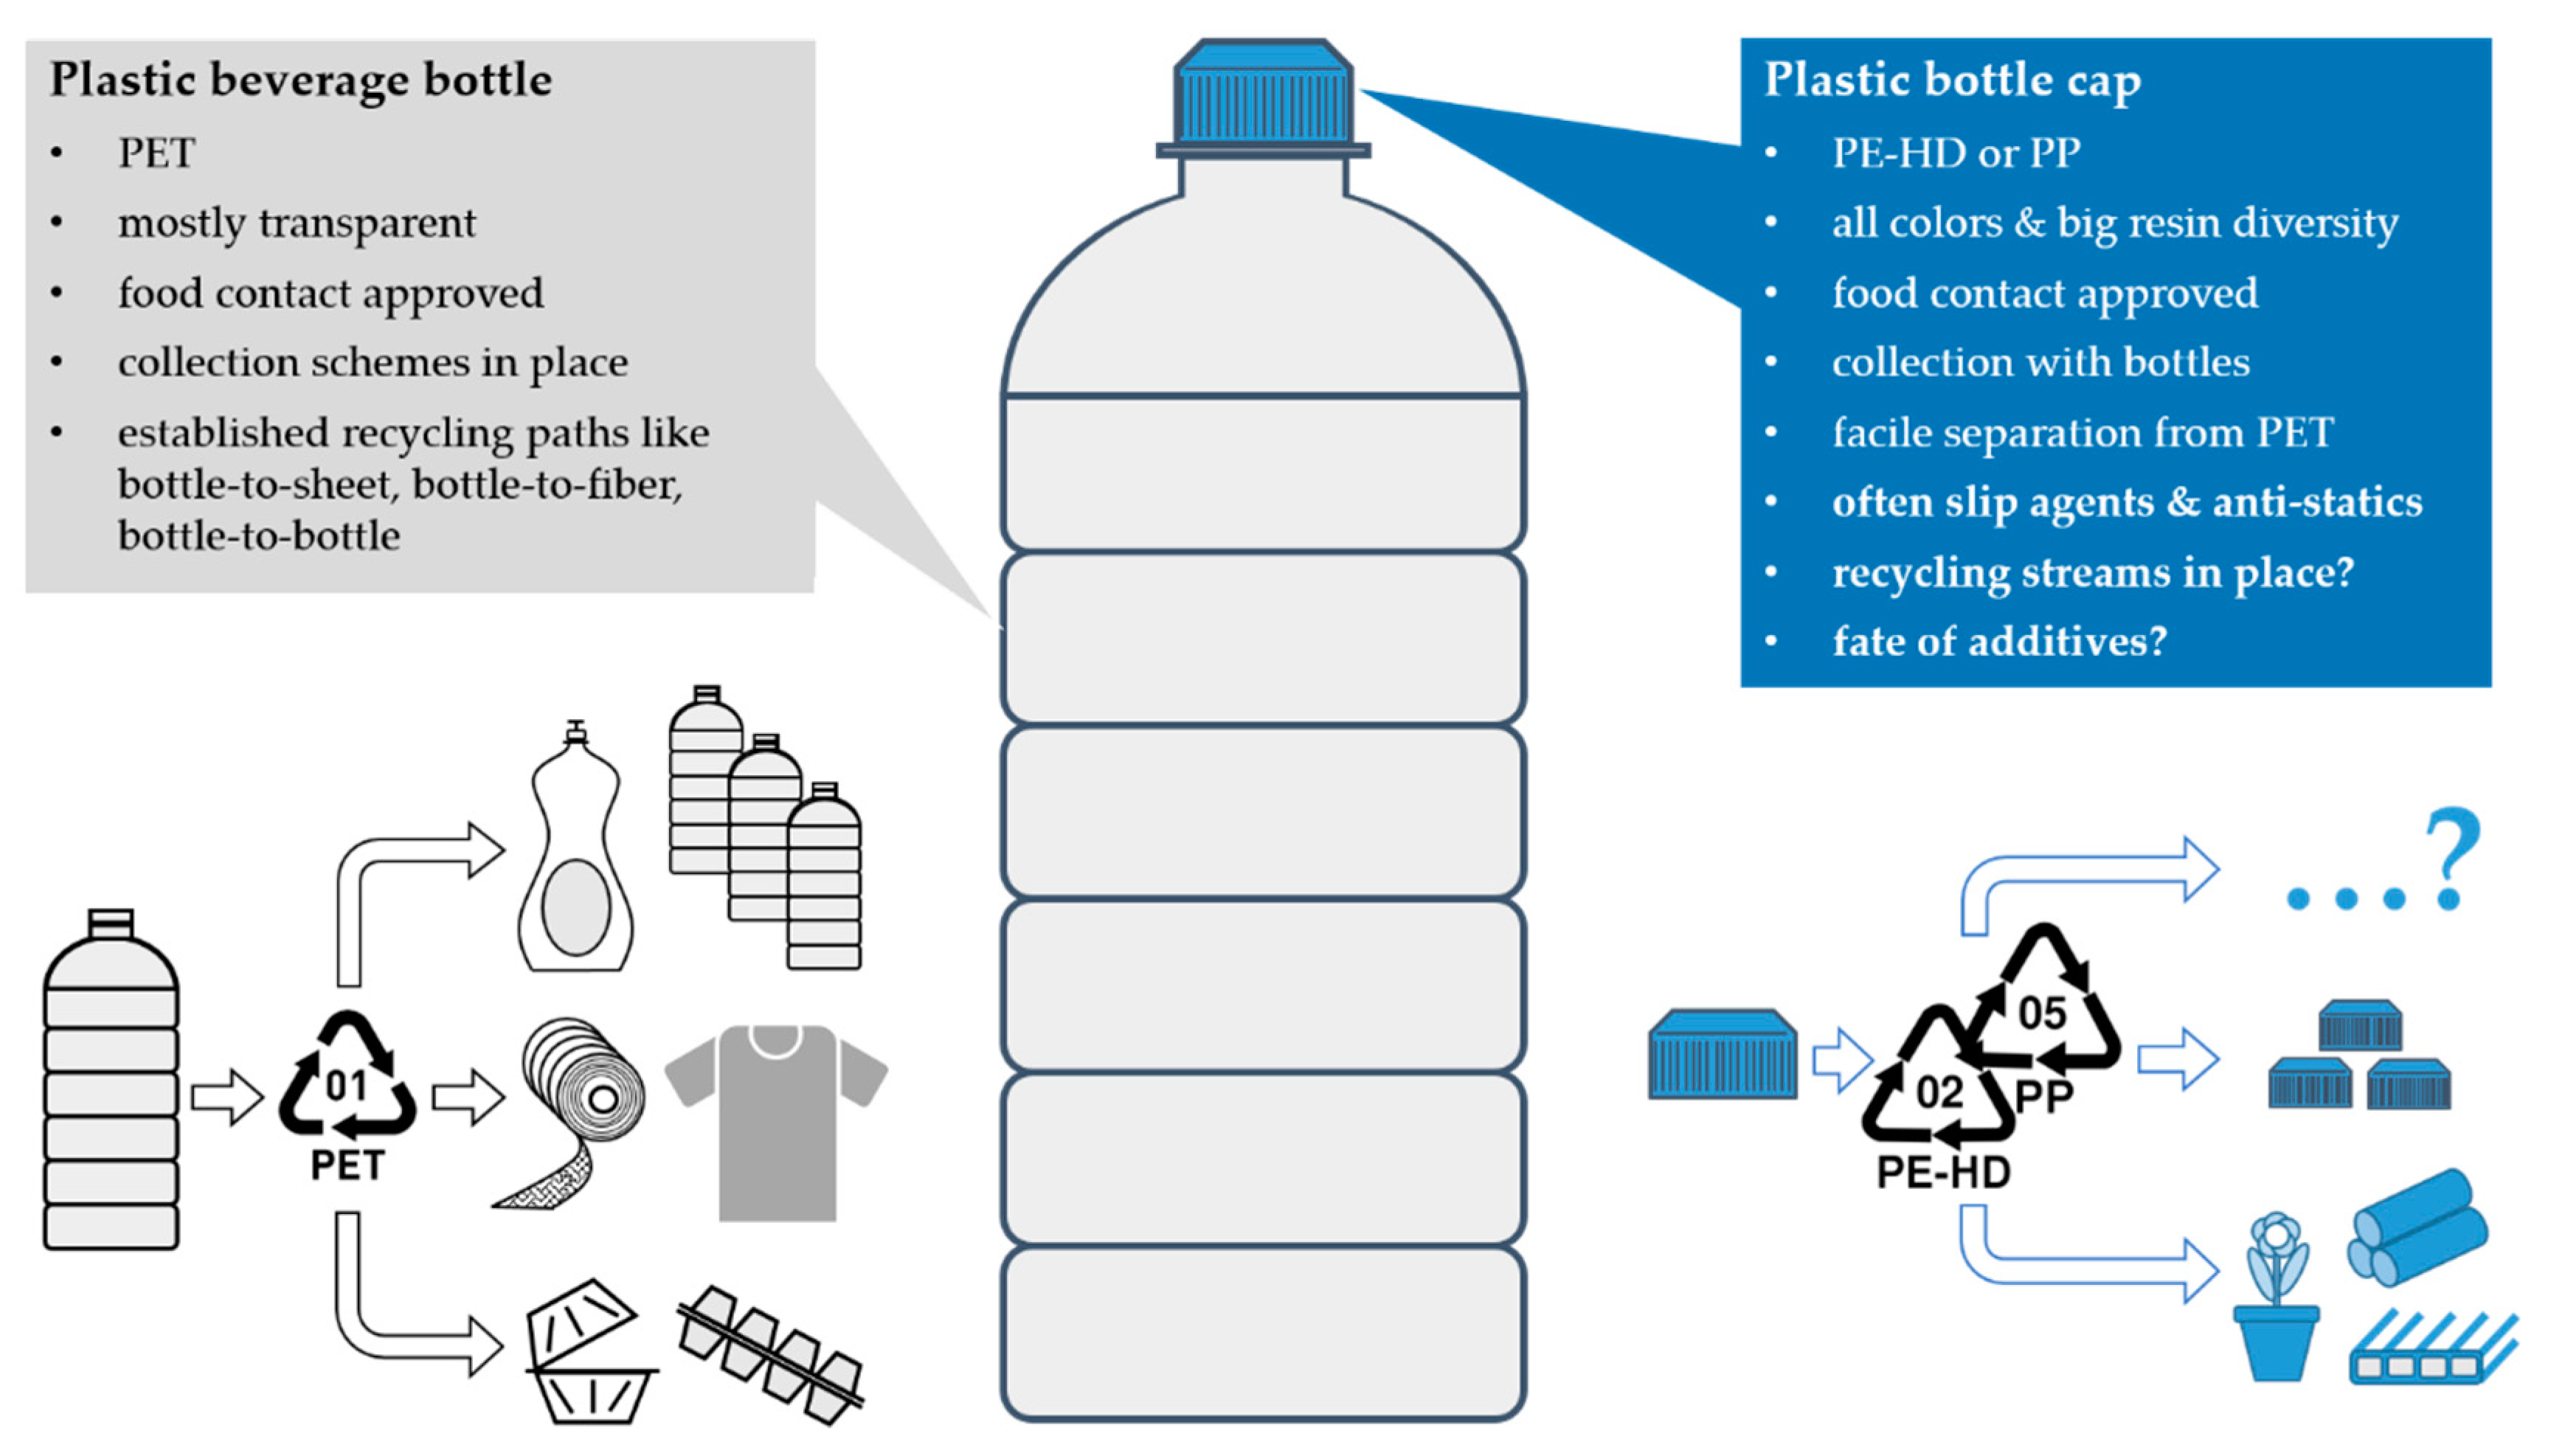 recycling plastic bottles research paper